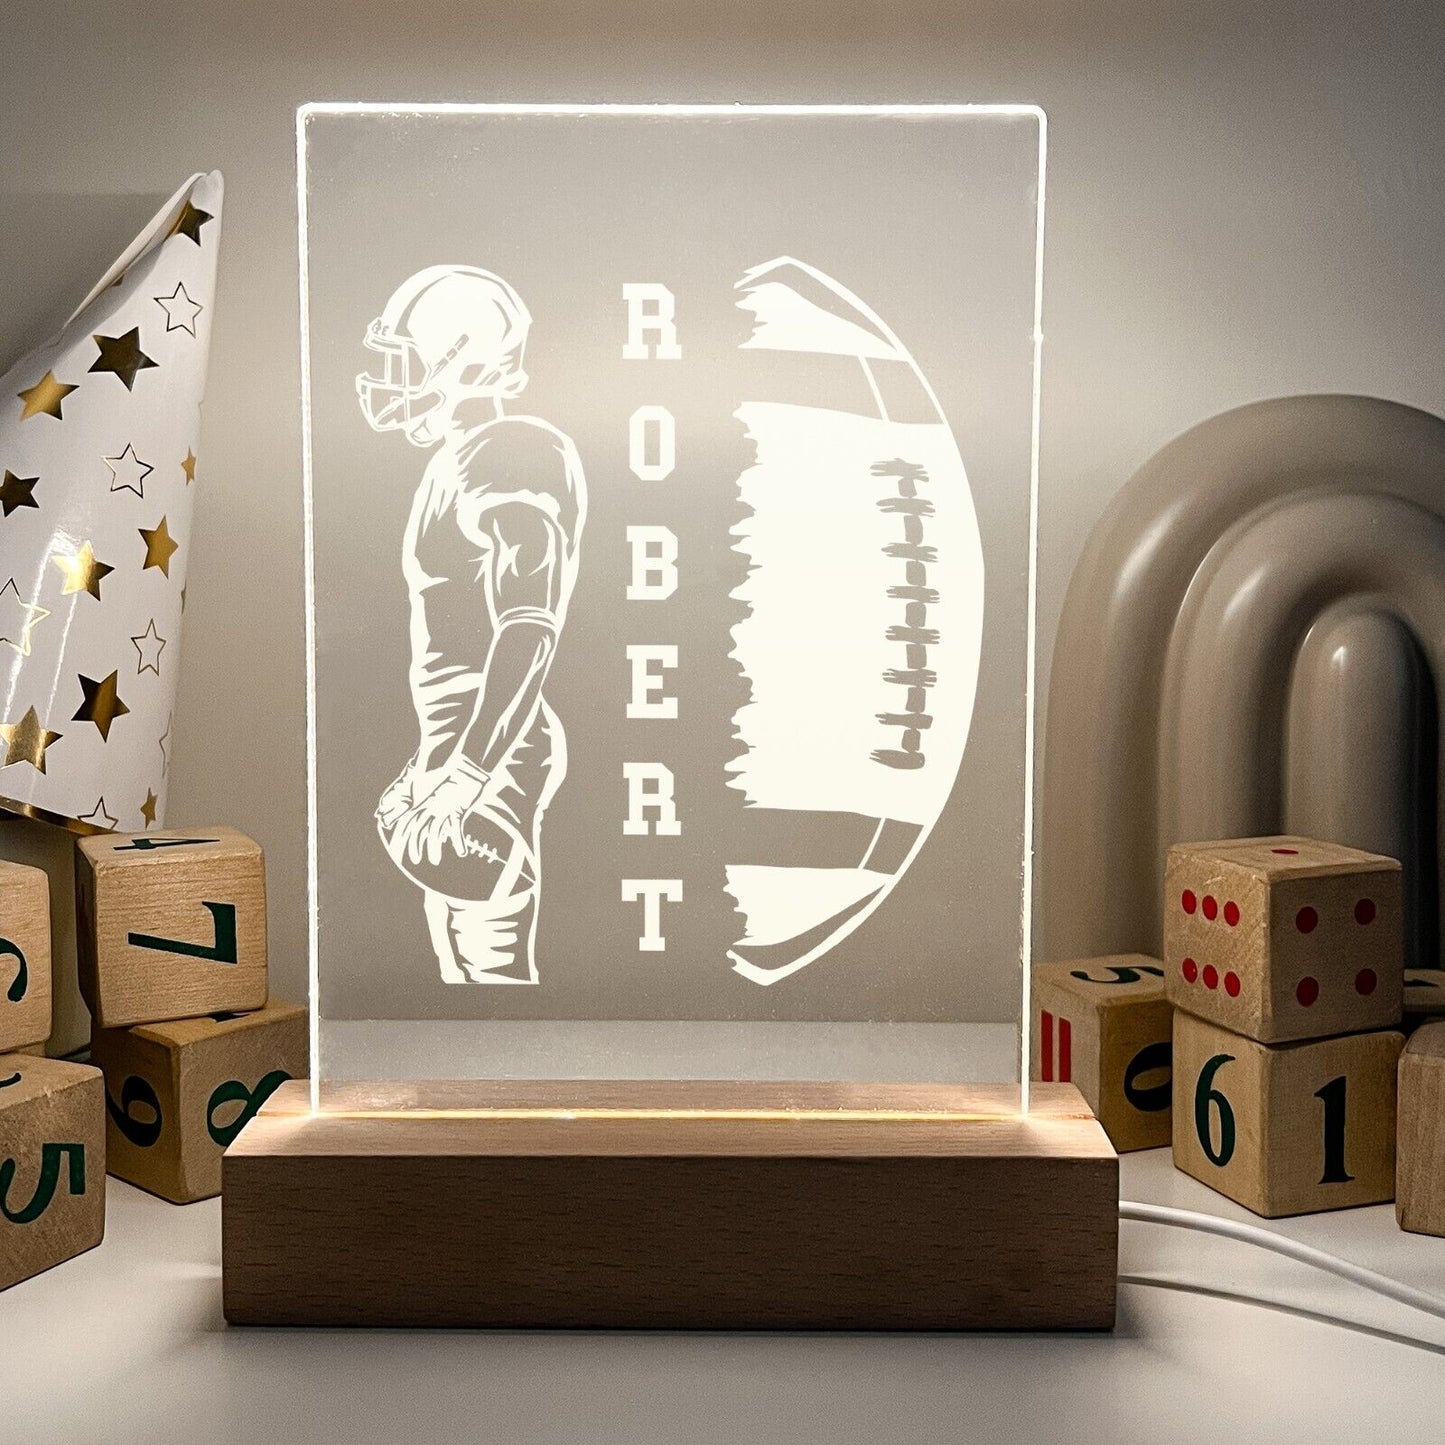 Personalized LED Light Up Desk Lamp Wood Stand USA Football Athlete Warner Gift